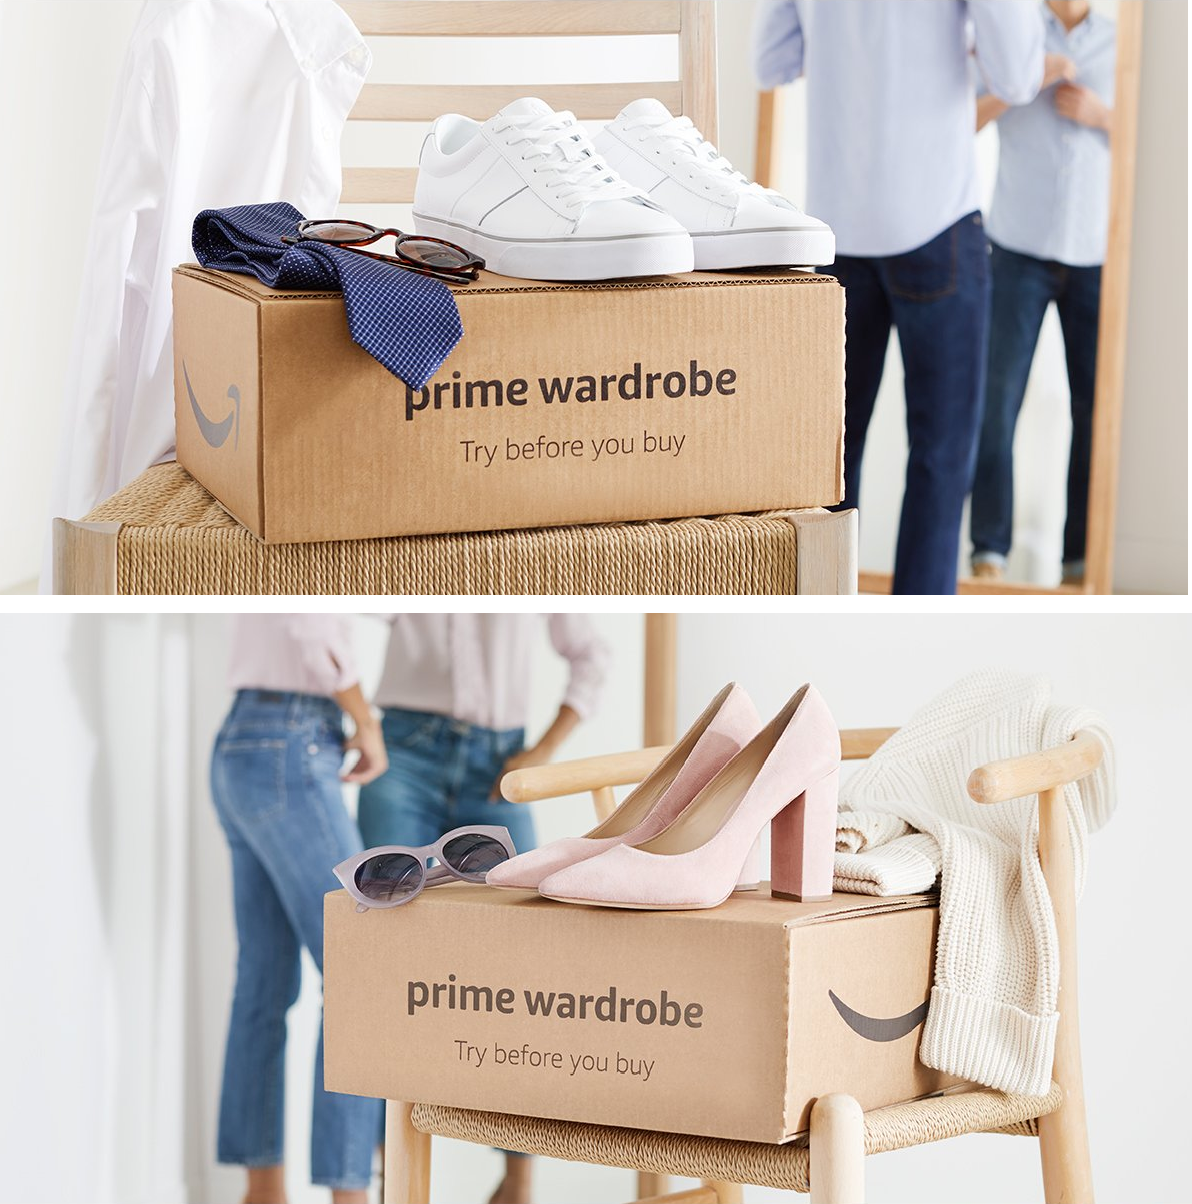 Amazon Prime Wardrobe And Six Other Stylish Subscription Boxes For Men